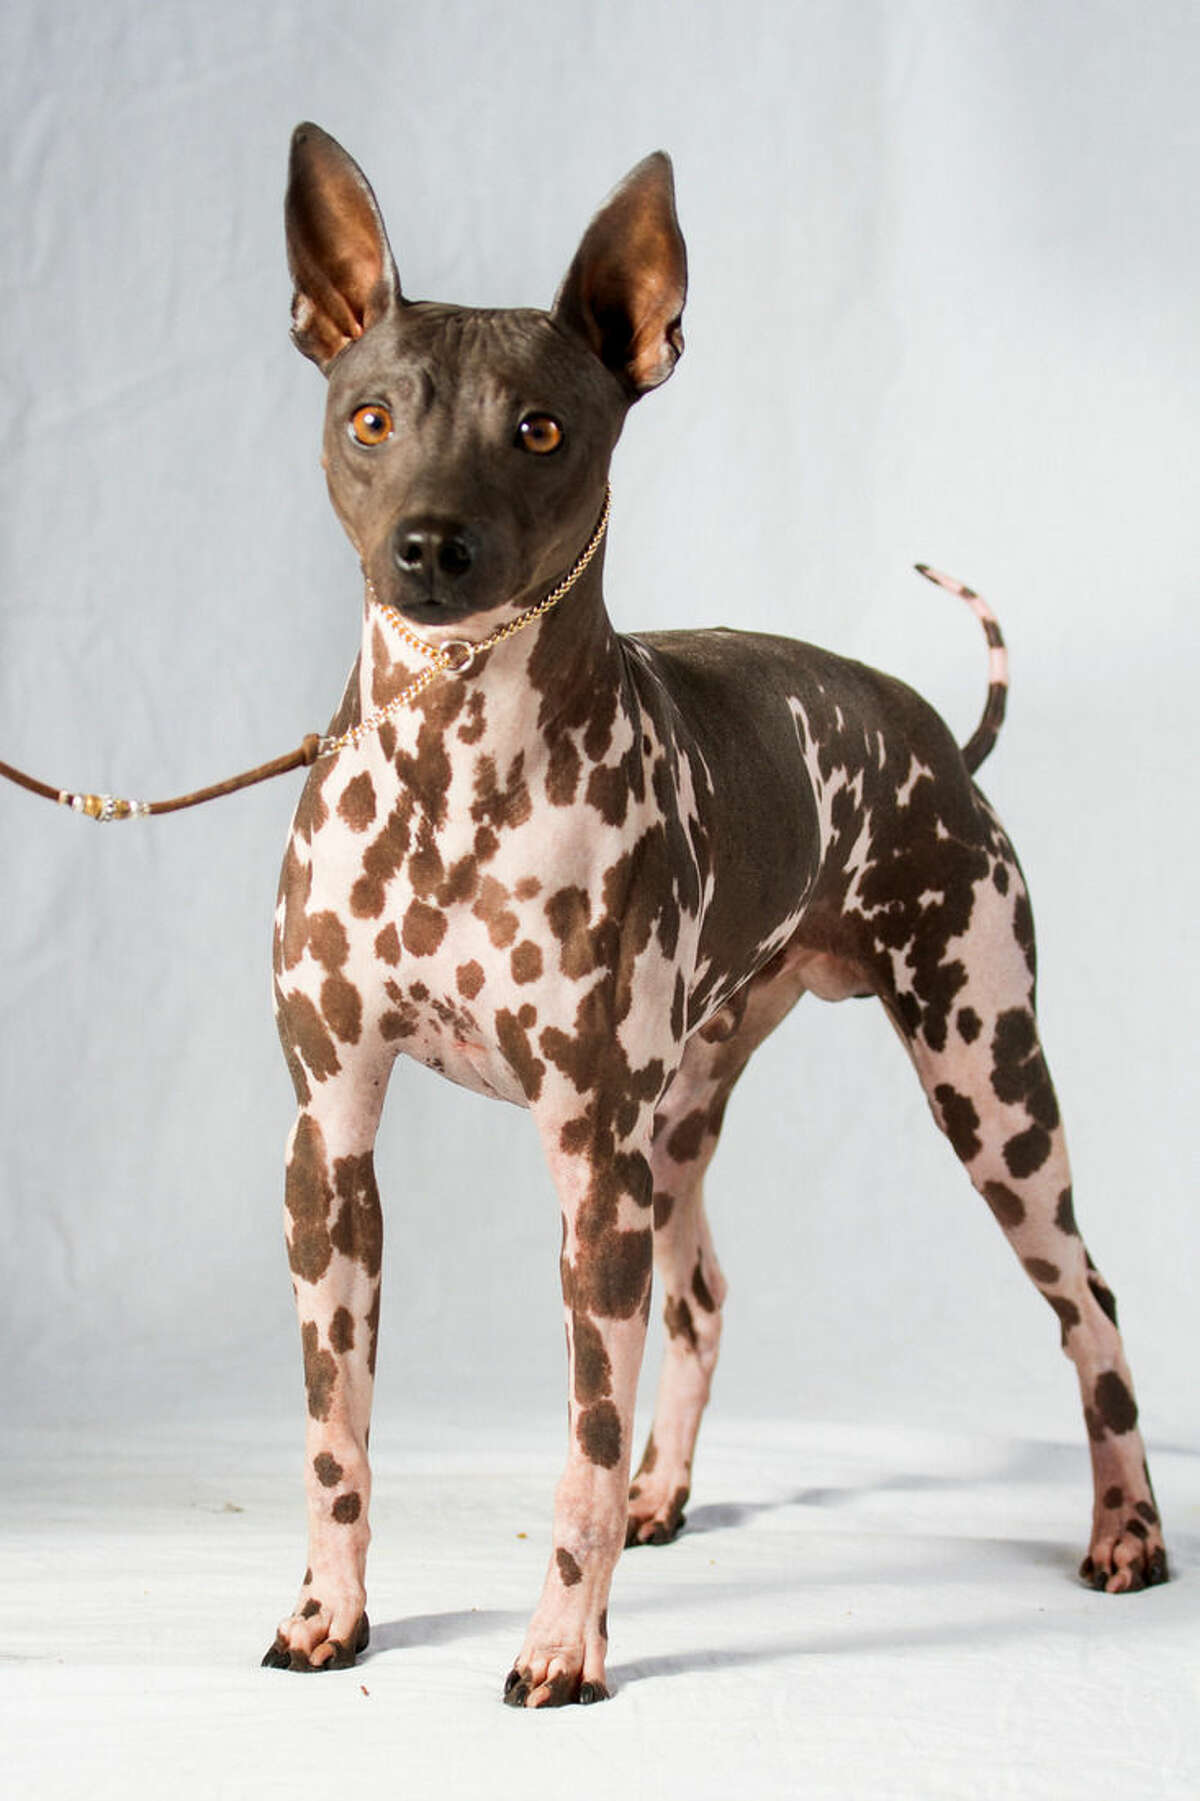 This undated photo provided by the American Kennel Club (AKC) shows an American Hairless Terrier, one of two newcomers recognized by the AKC that can now compete in most of the organizations shows and competitions, though not at the prominent Westminster Kennel Club show until next year. The two new breeds announced Tuesday, Jan 5, 2016, are the hairless terrier and a sloughi, also called the Arabian greyhound. (American Kennel Club via AP)